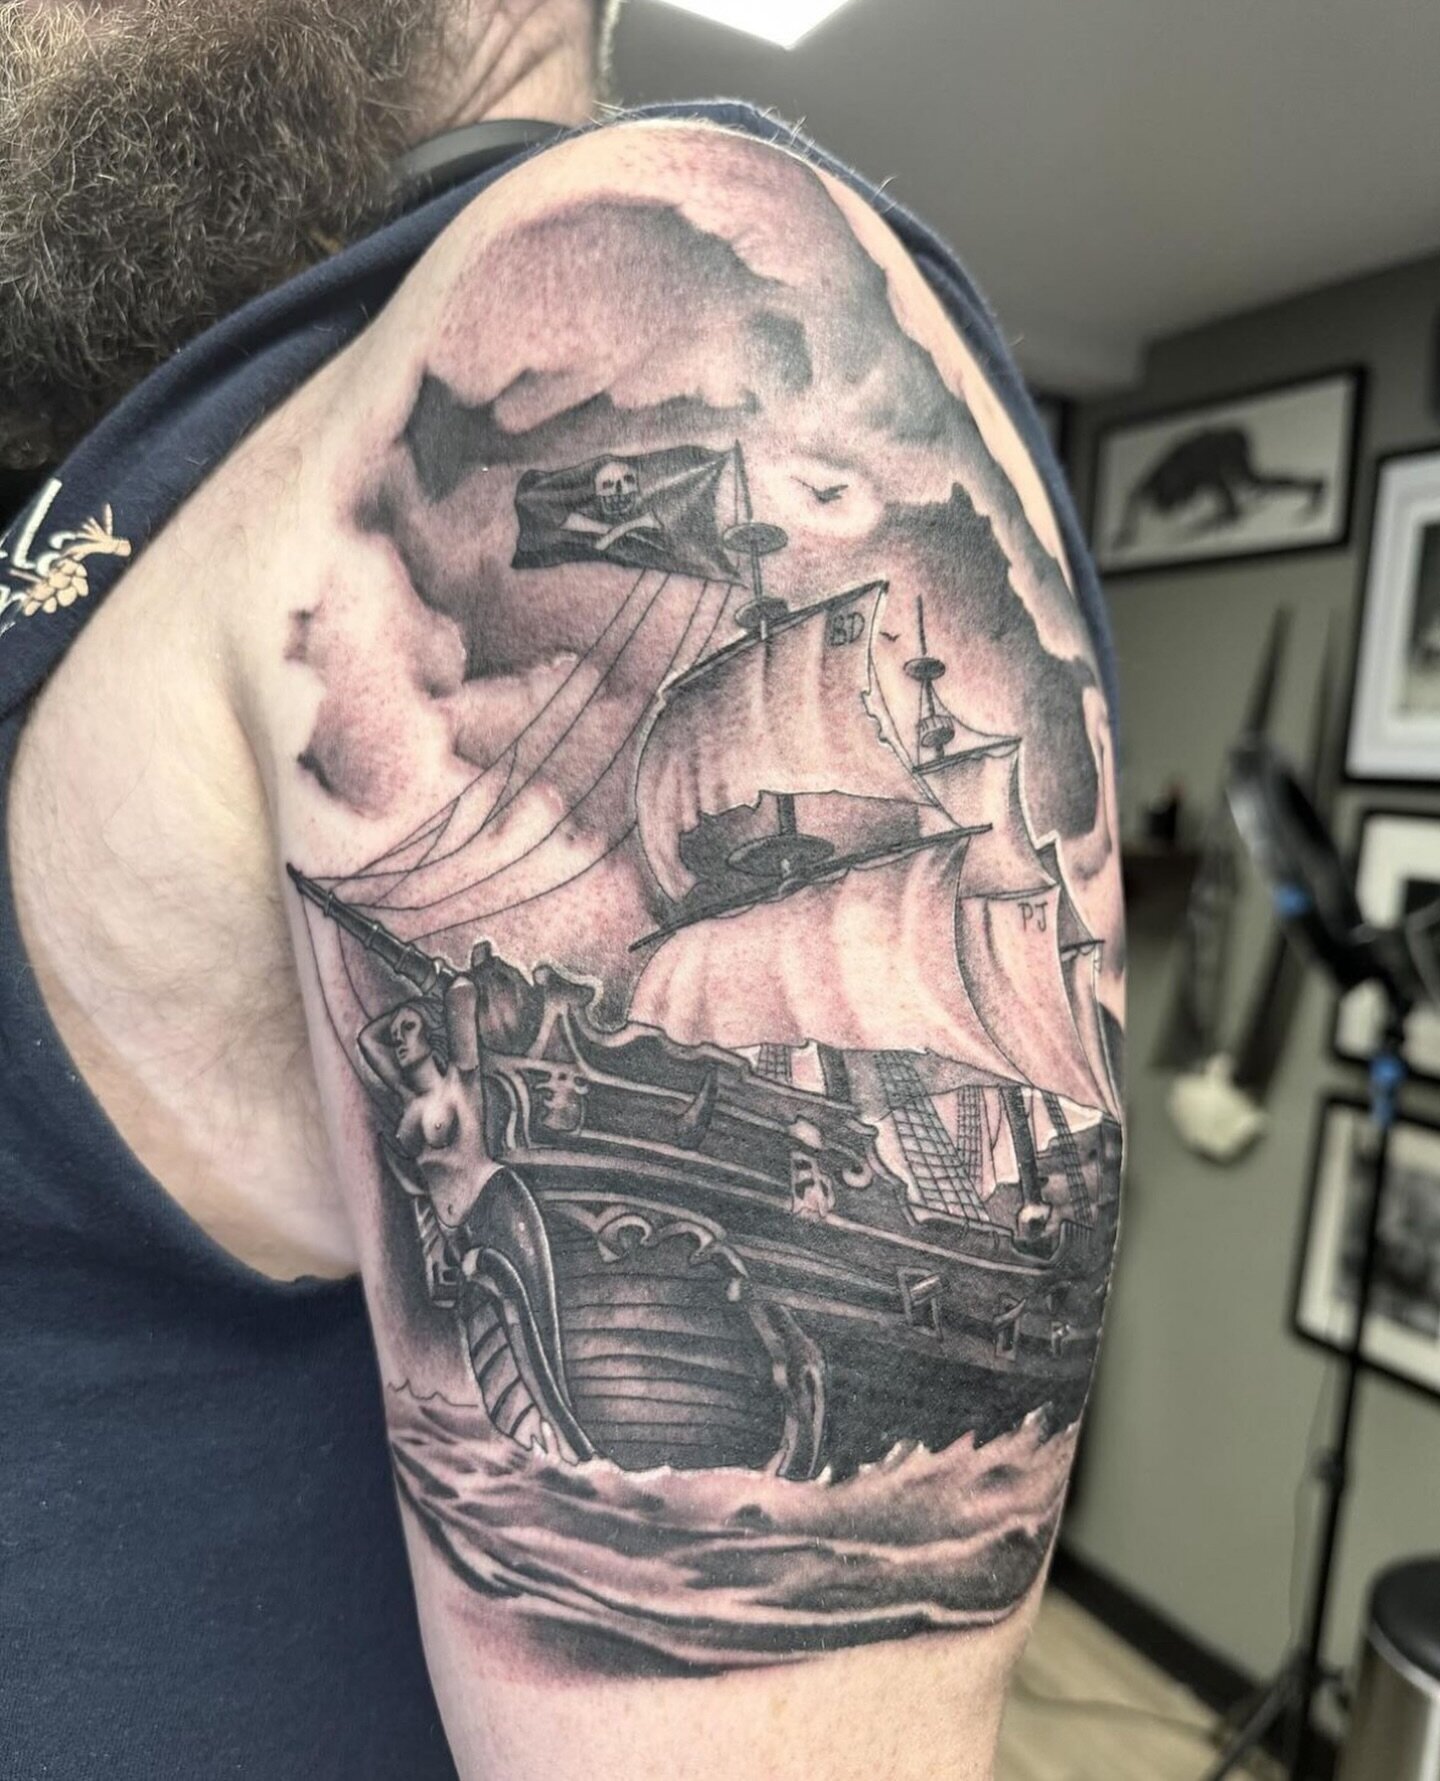 Pirate ship done by @vinniepernice_tattoo